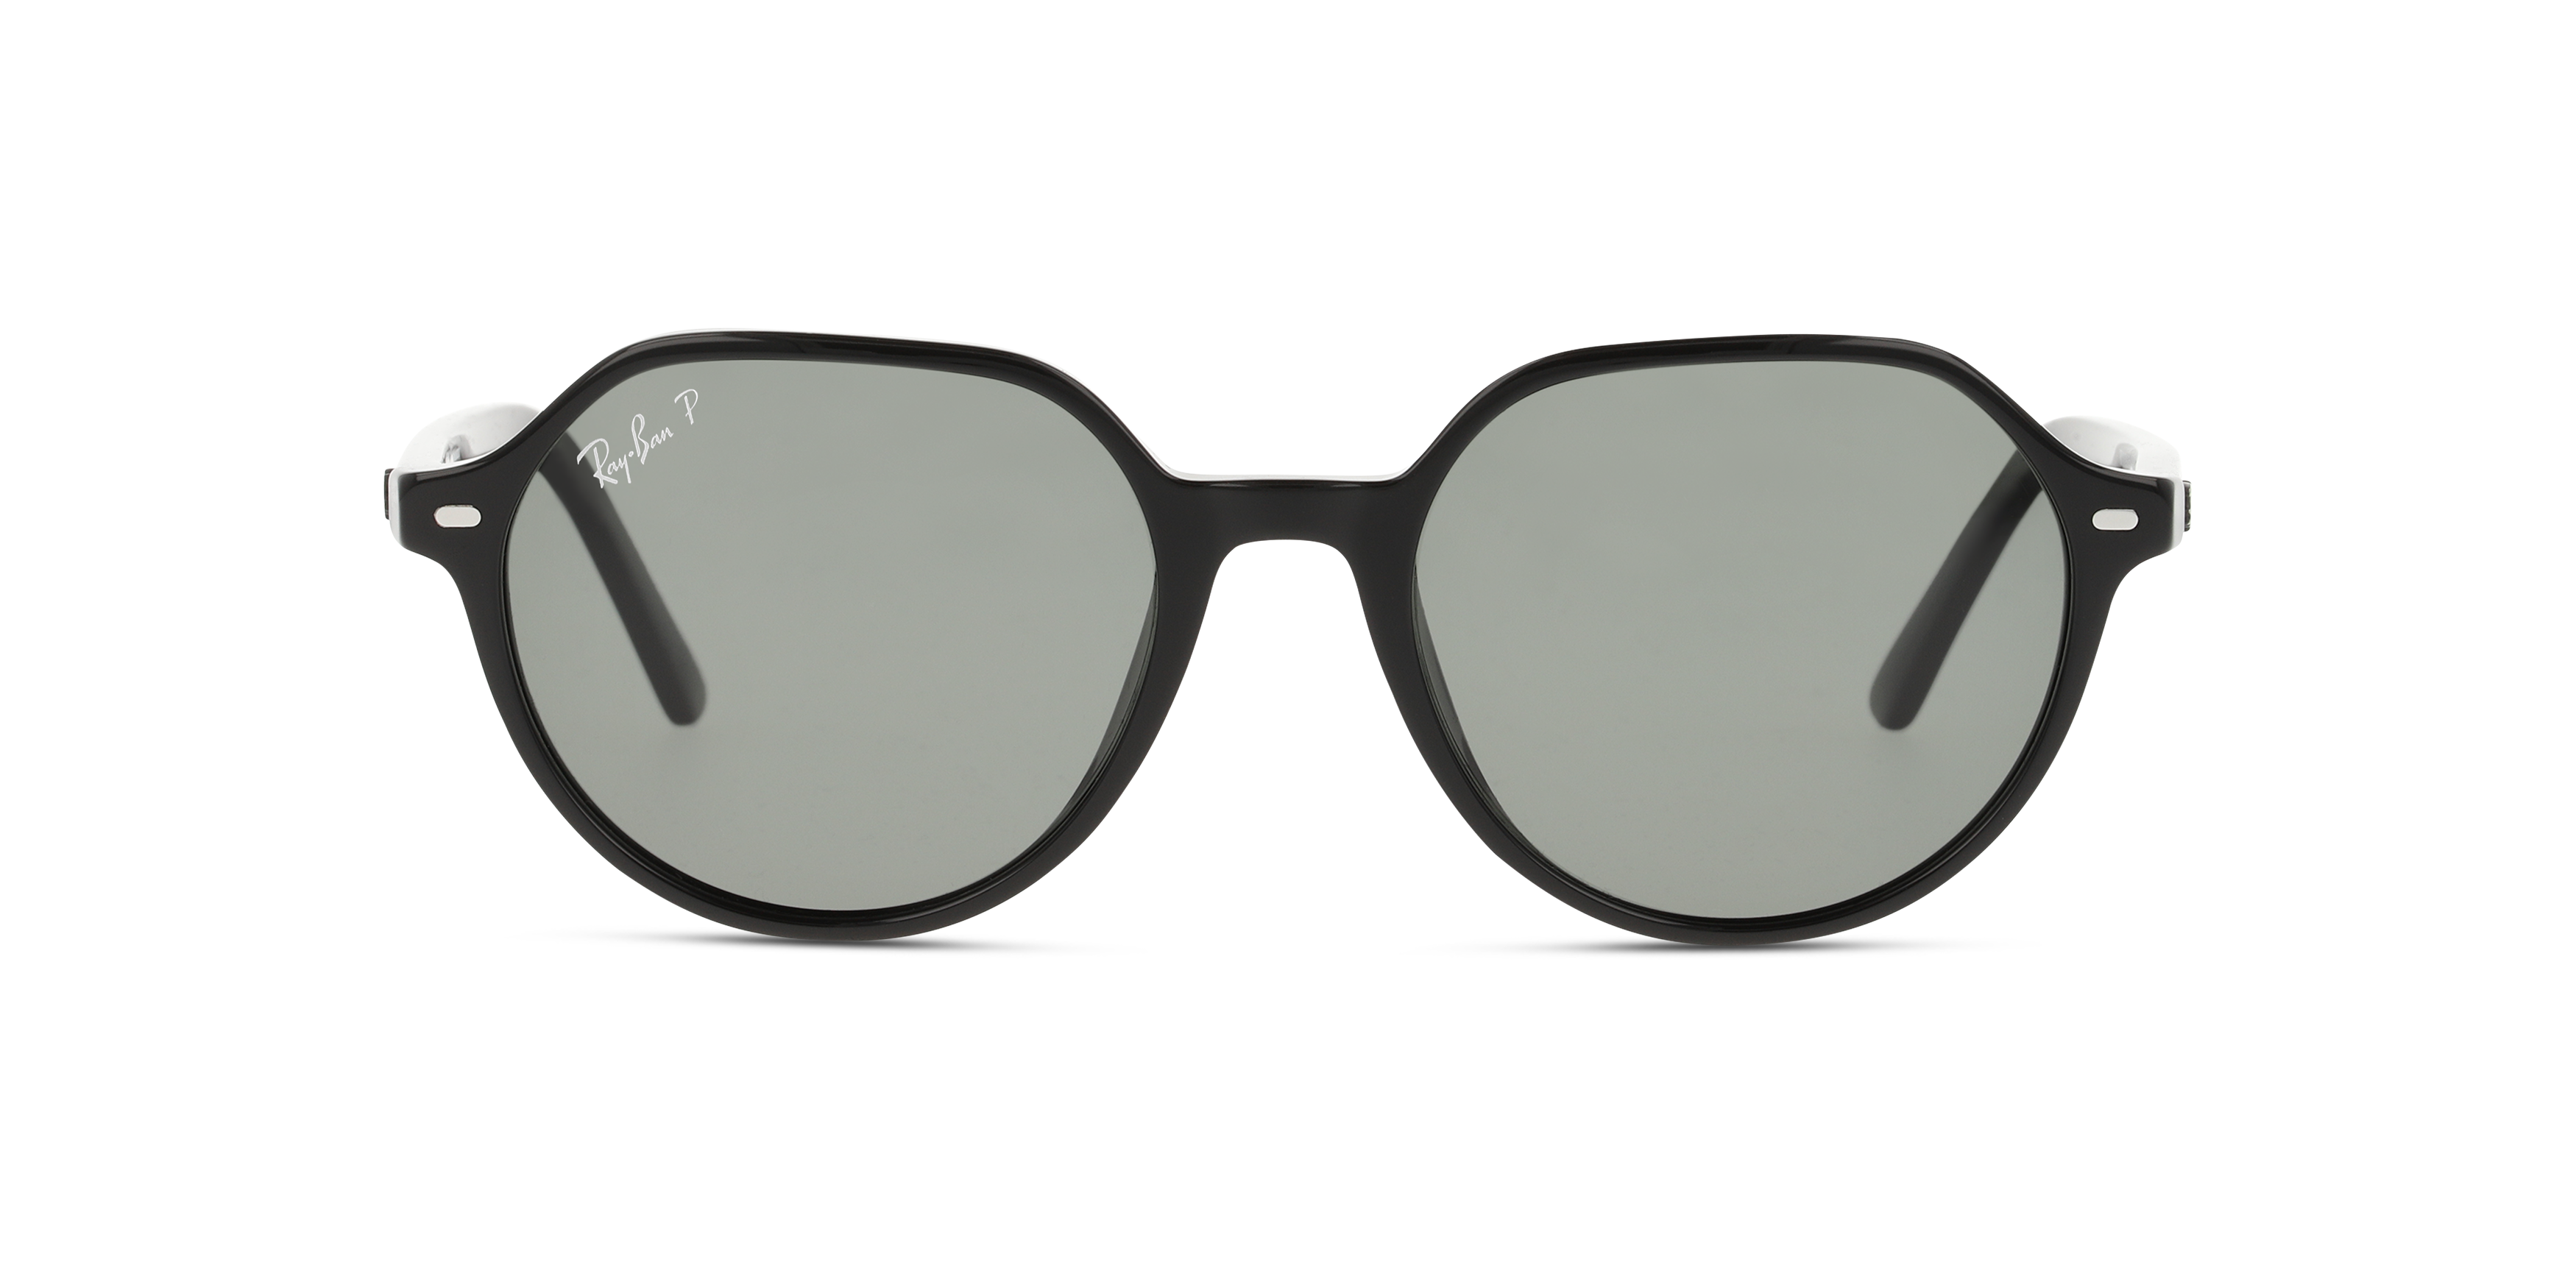 [products.image.front] Ray-Ban 0RB2195 901/58